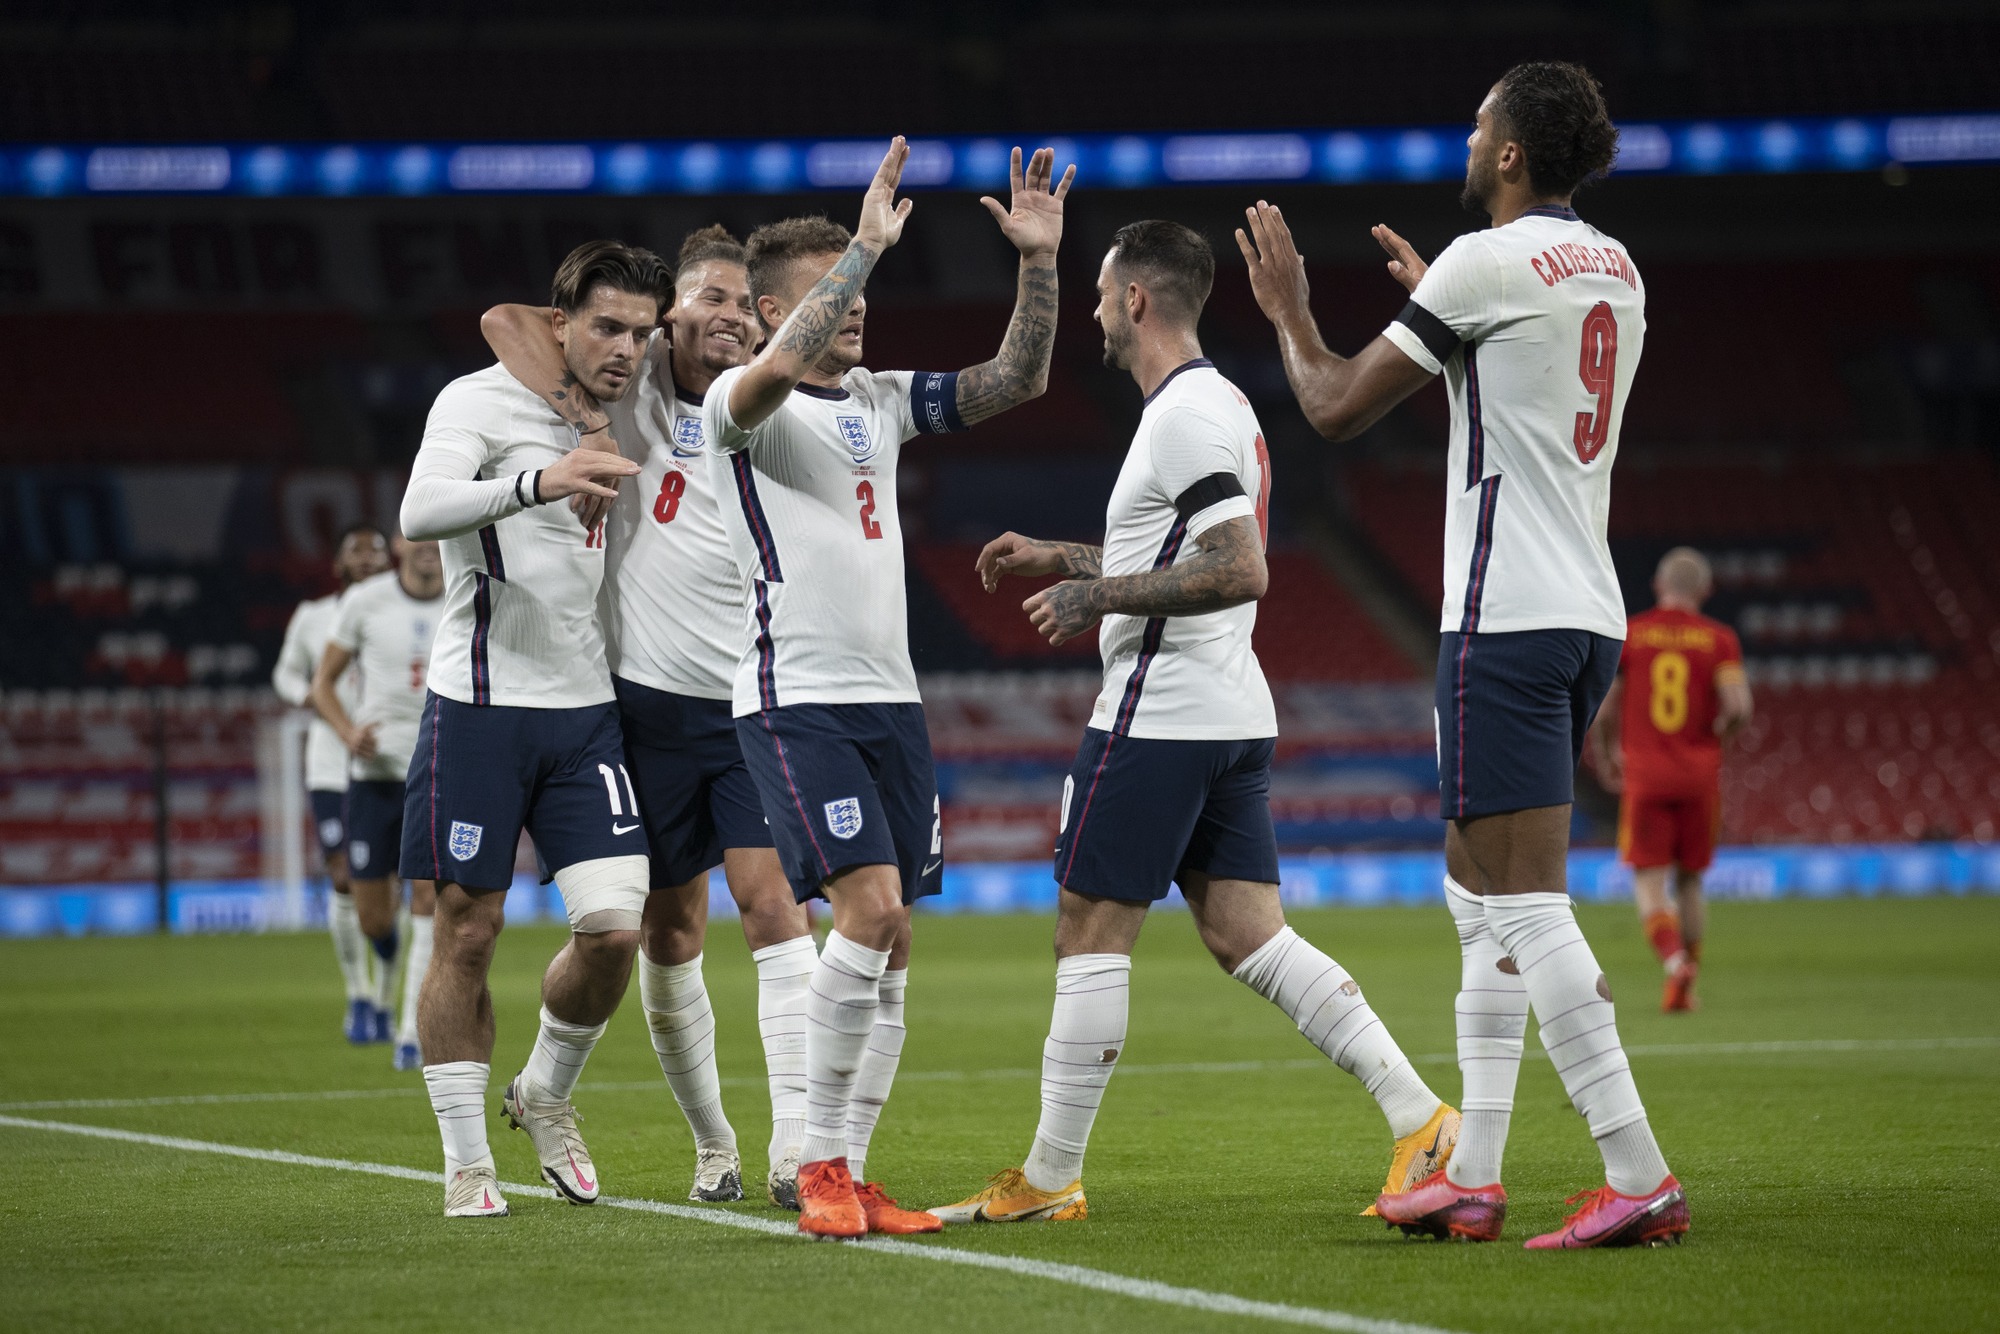 England 3-0 Wales: Calvert-Lewin marks debut with goal as England dominate Wales